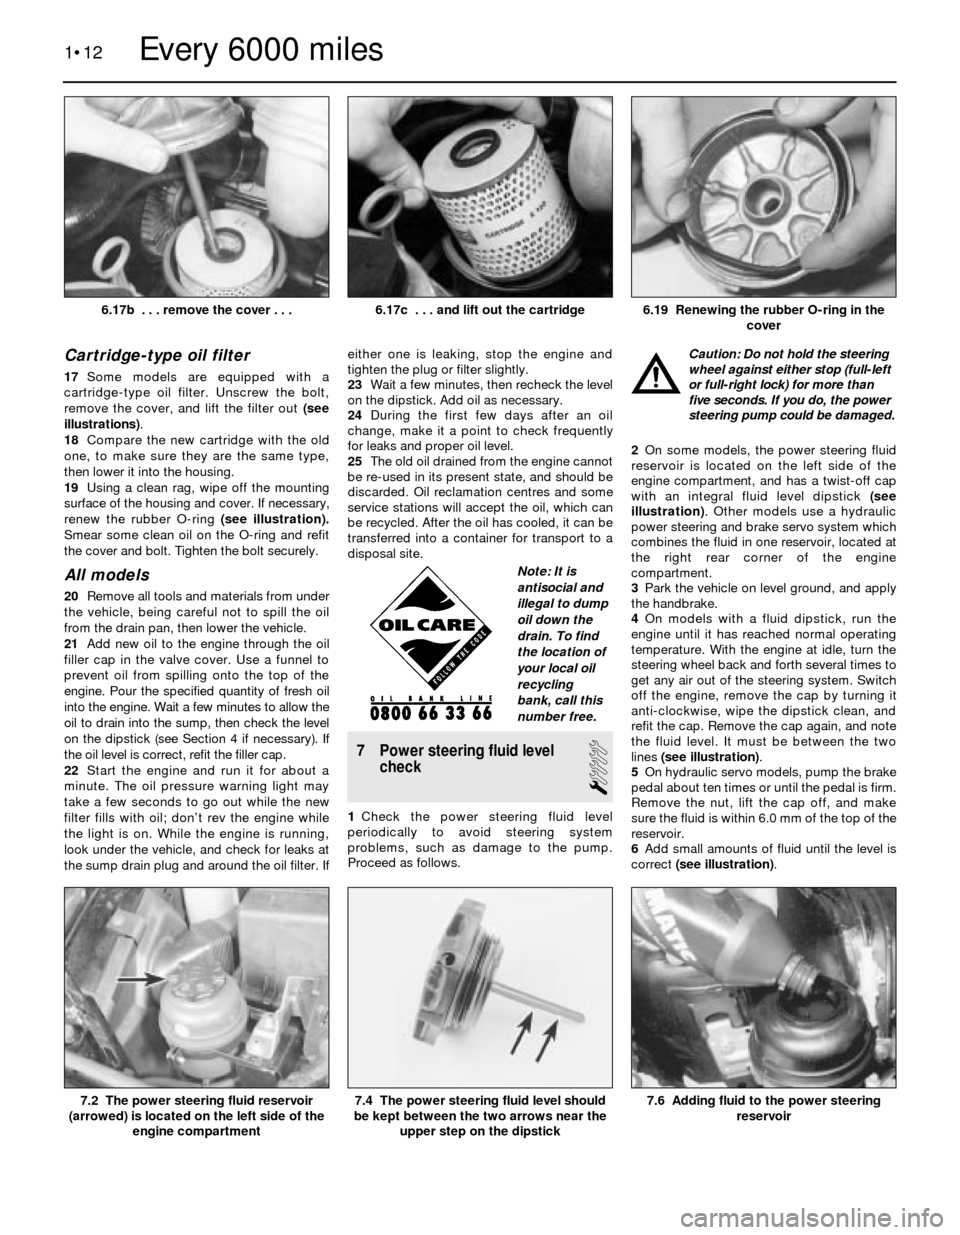 BMW 3 SERIES 1986 E30 Workshop Manual Cartridge-type oil filter
17Some models are equipped with a
cartridge-type oil filter. Unscrew the bolt,
remove the cover, and lift the filter out (see
illustrations).
18Compare the new cartridge with